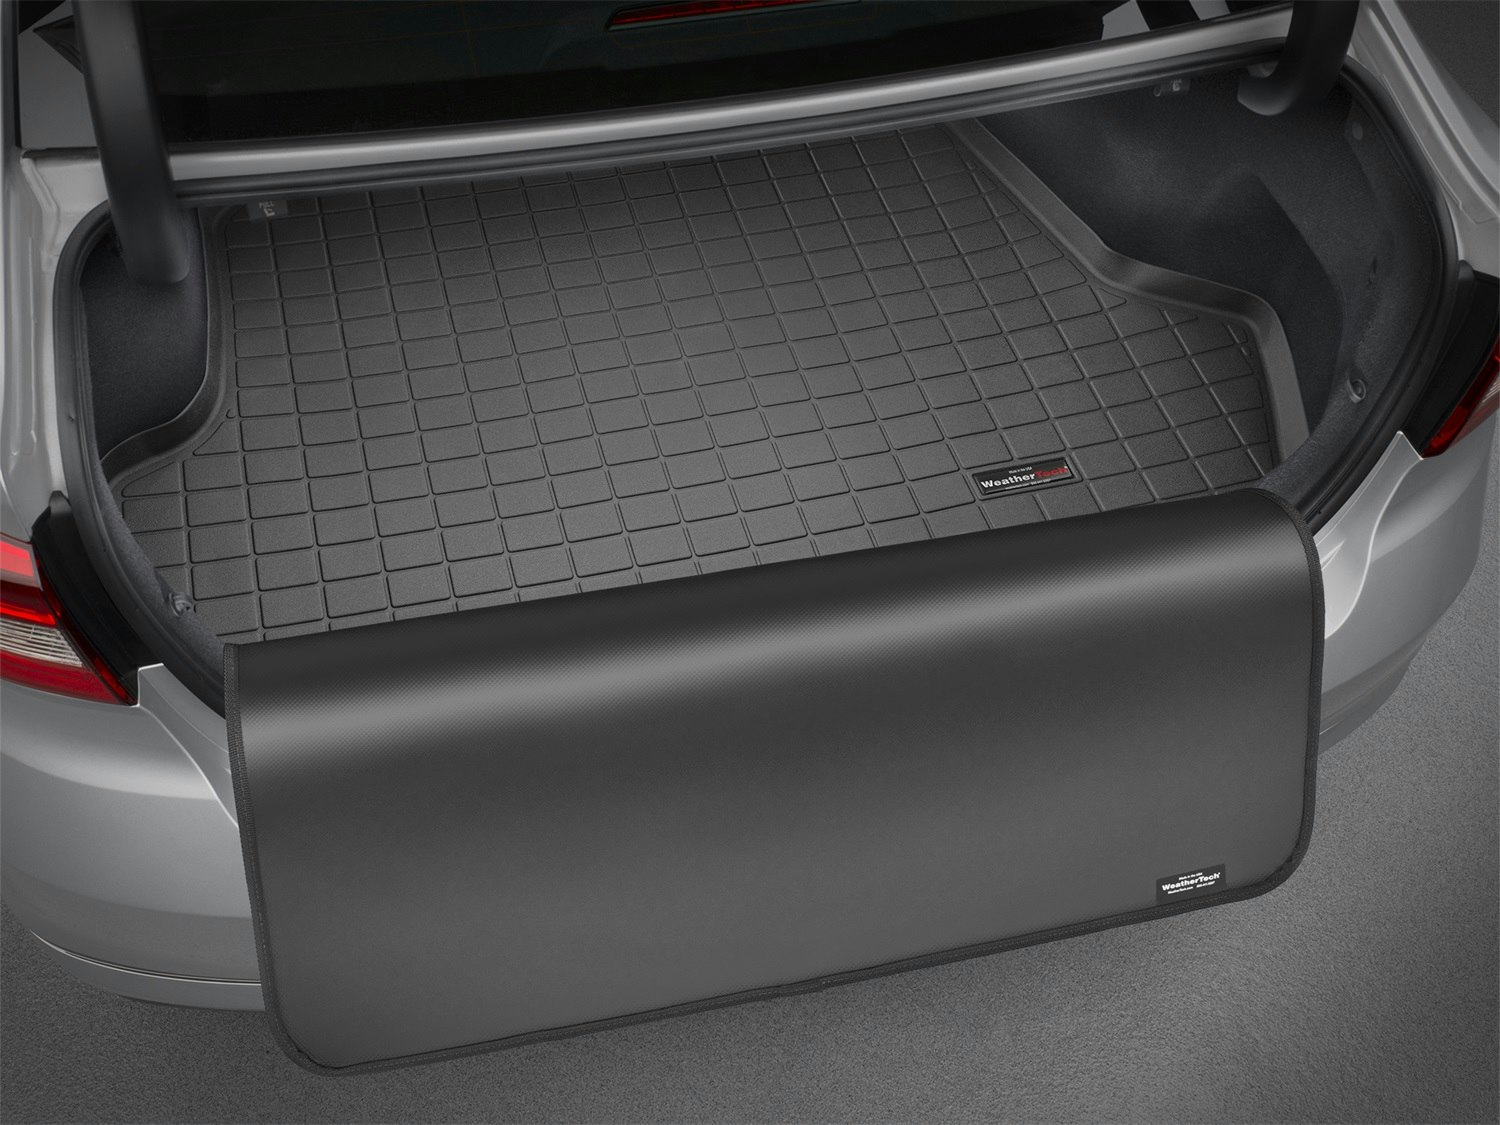 WeatherTech Cargo Trunk Liner with Bumper Protector for Porsche(R) Cayenne(R) Black (40487SK) - 1